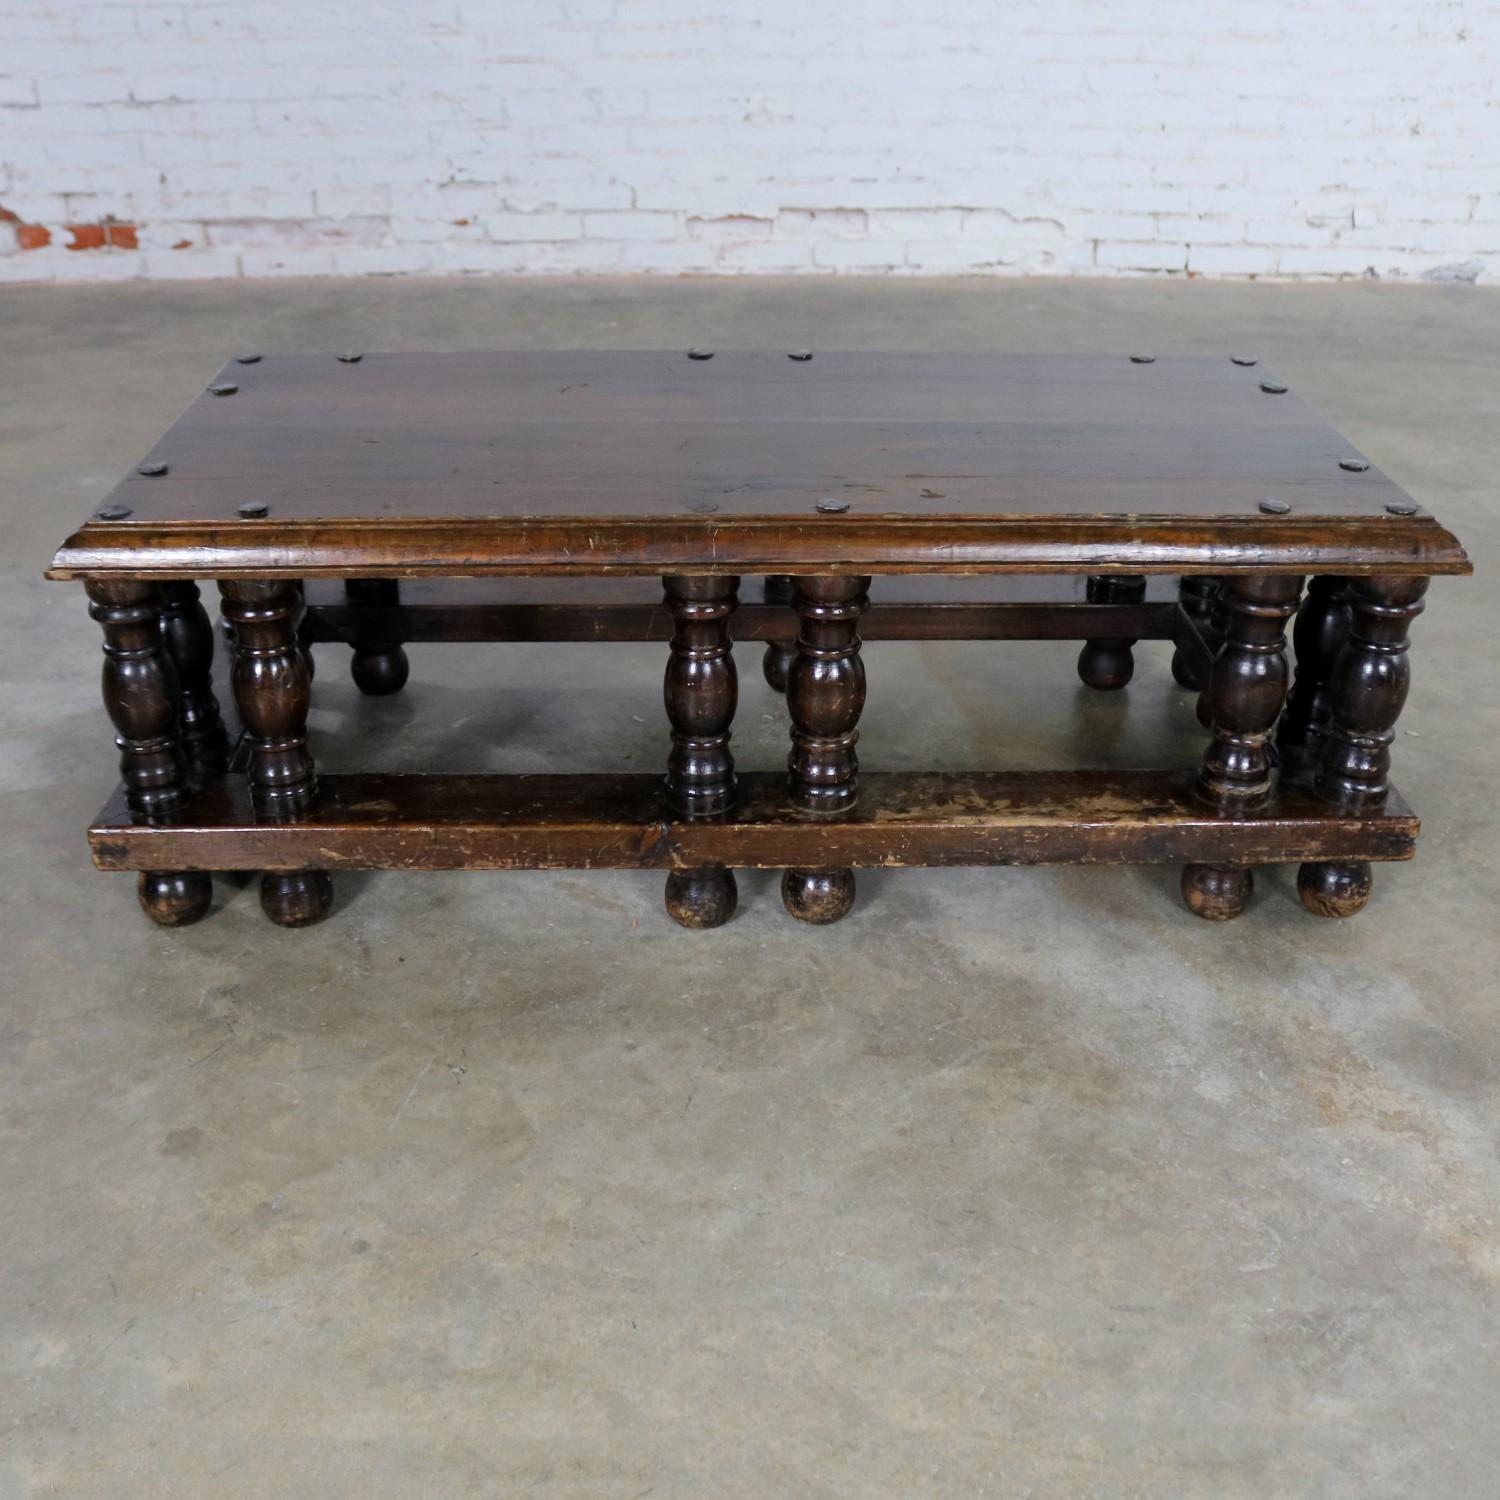 Incredible Spanish Revival style rectangular coffee table attributed to Artes De Mexico Internacionales, SA. It is in wonderful vintage condition with hand hammered metal extra large nail heads, turned legs, and lots of age patina with its original